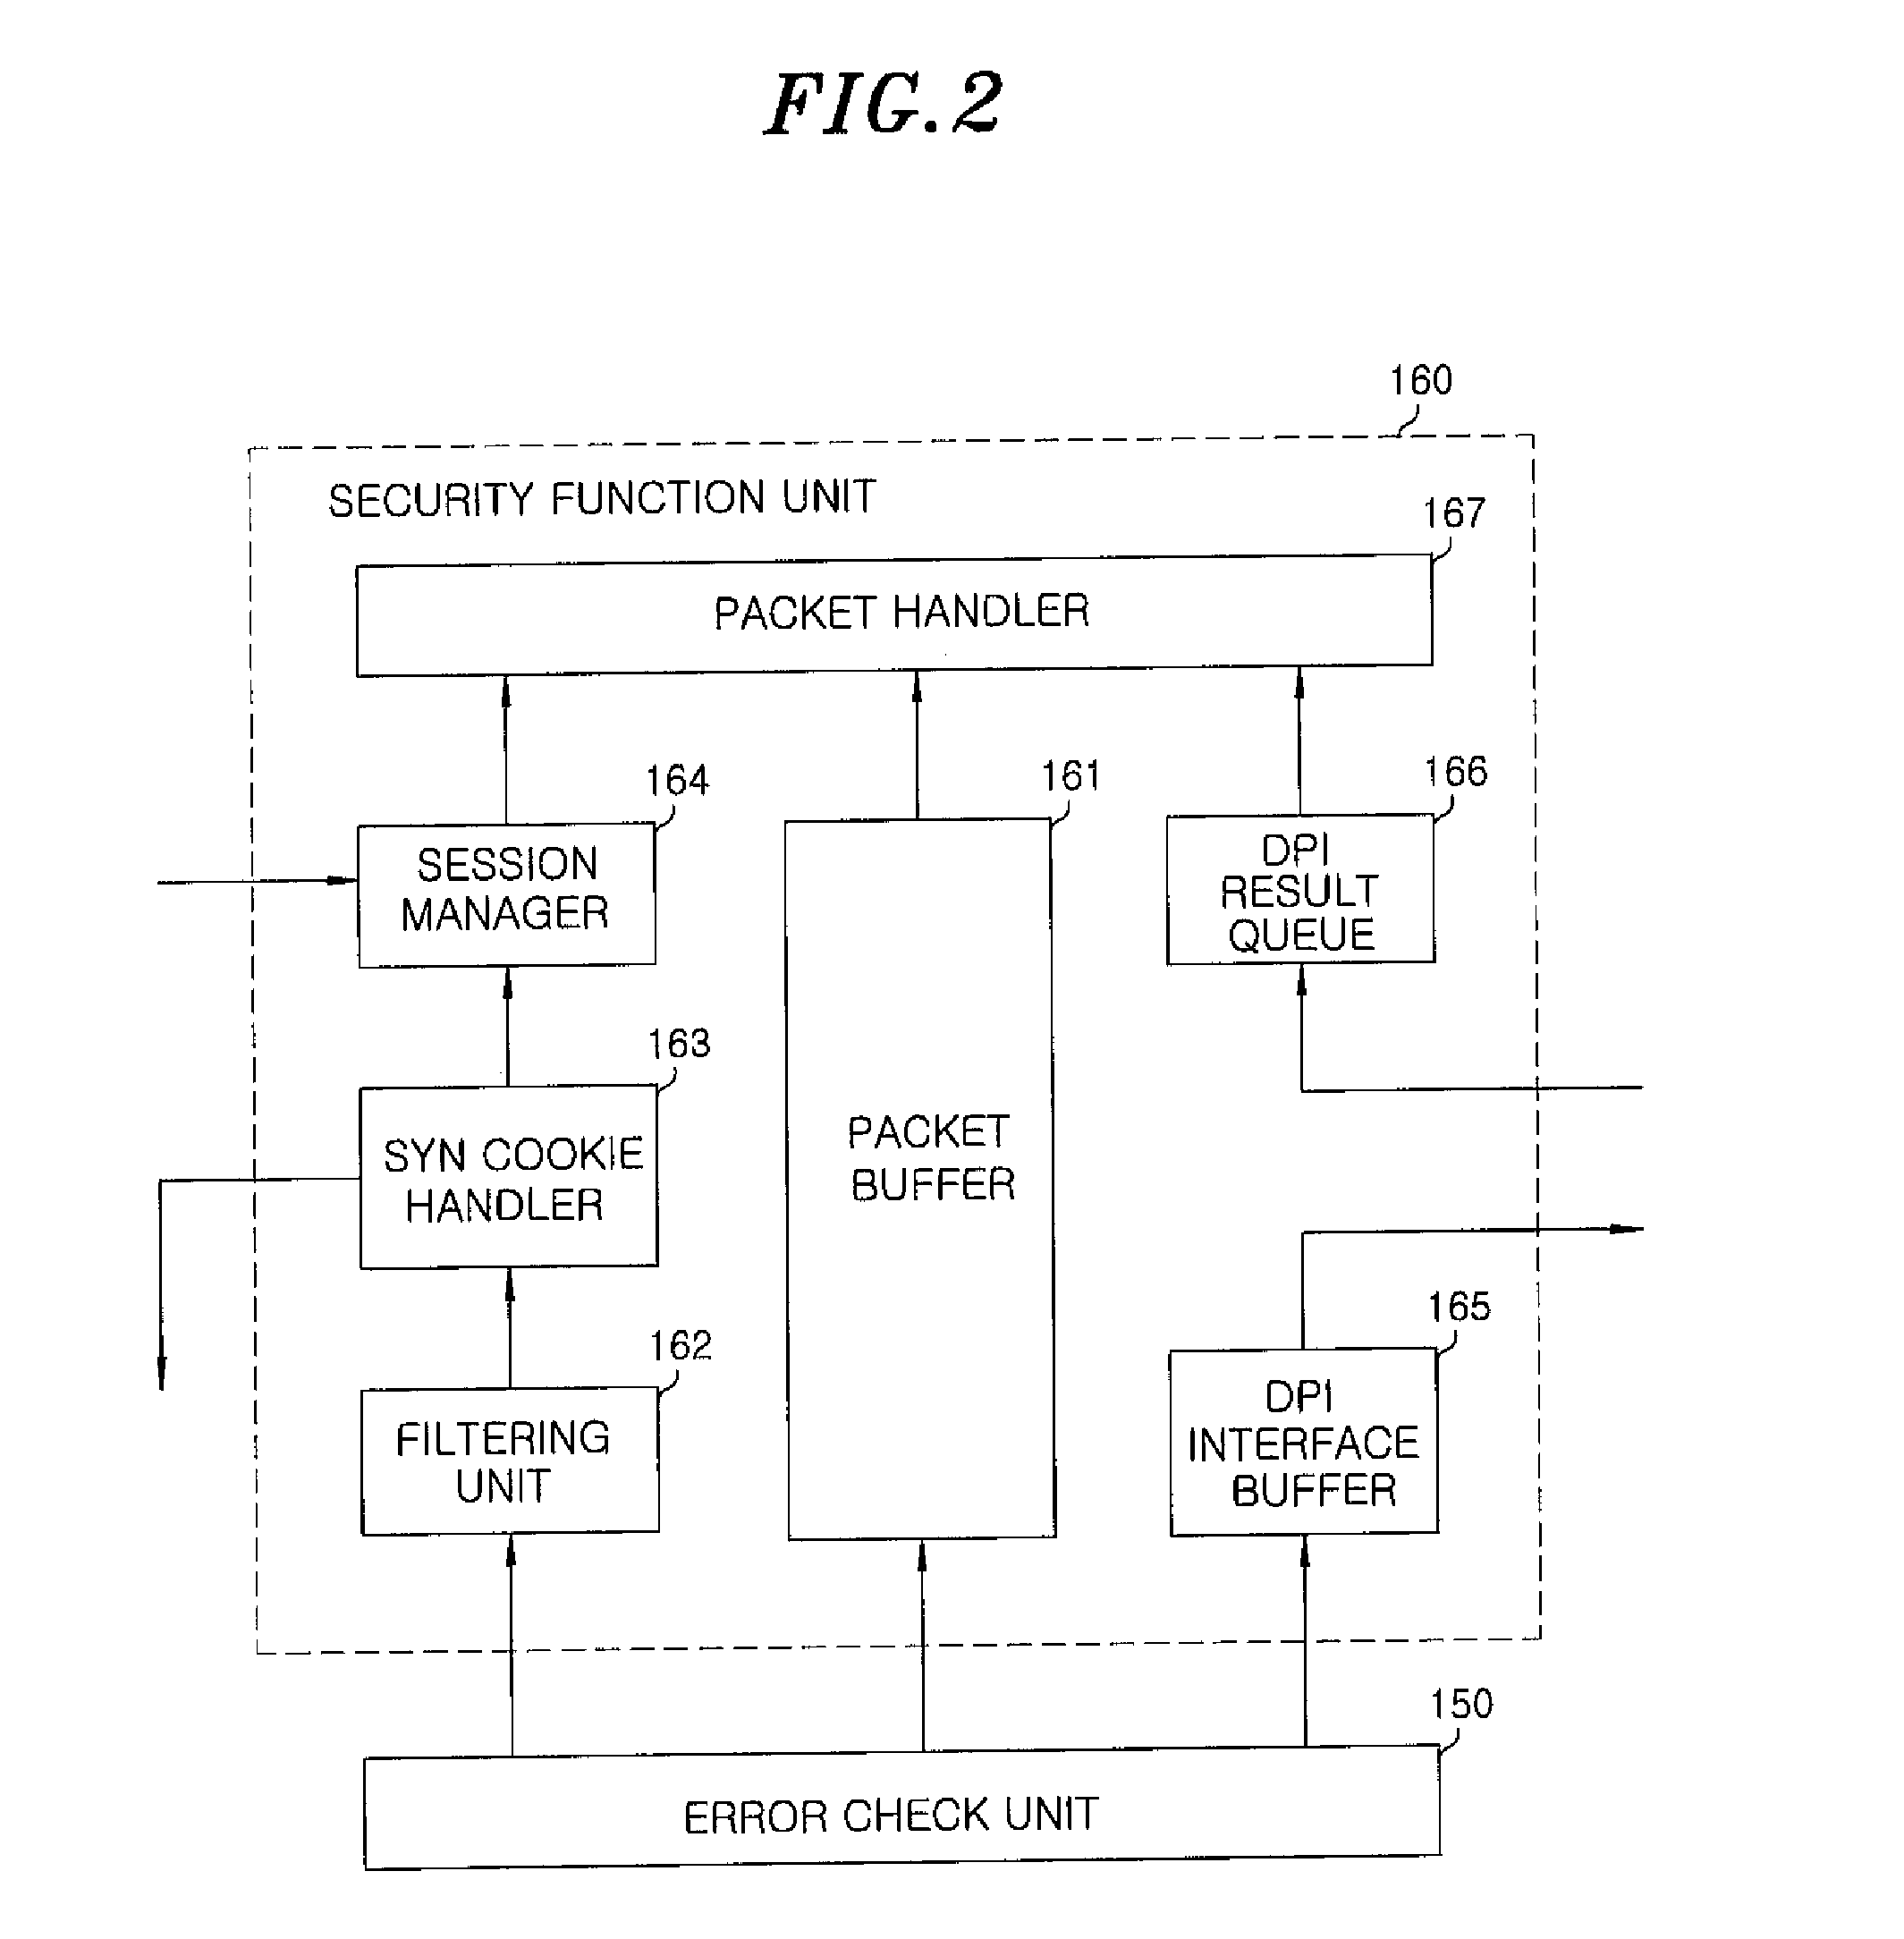 Apparatus and method for preventing network attacks, and packet transmission and reception processing apparatus and method using the same